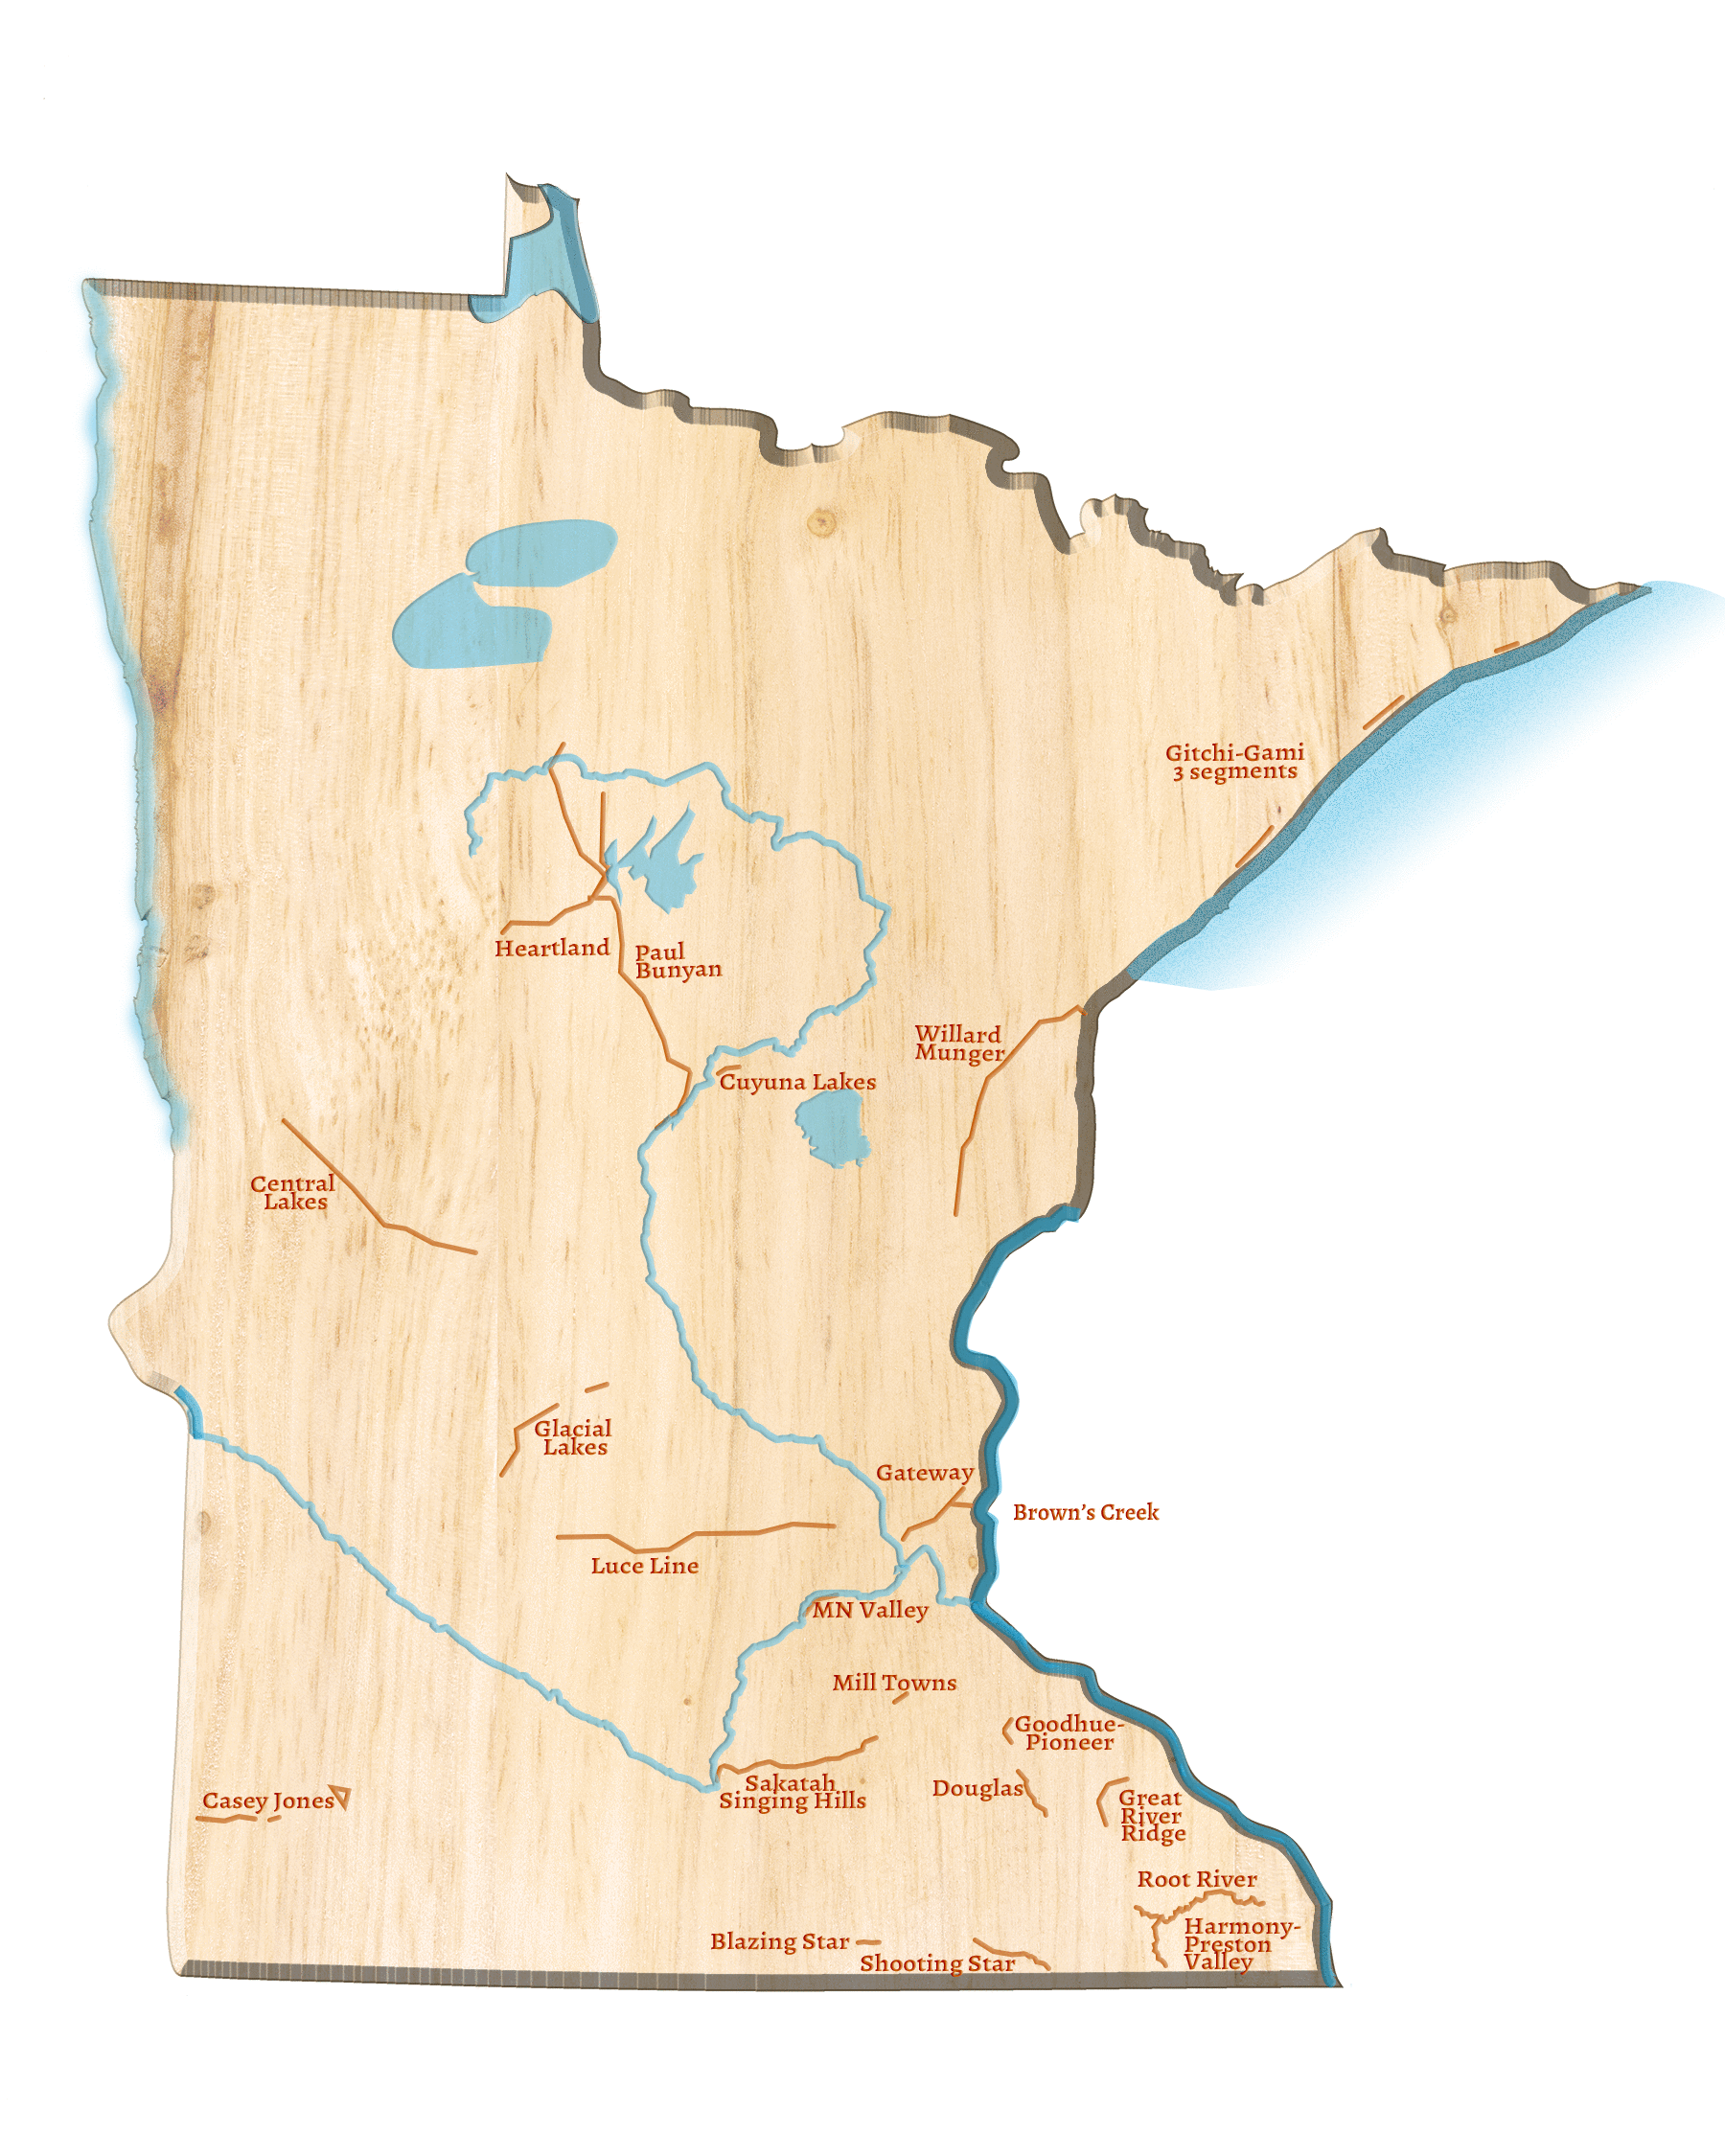 Wooden image of Minnesota with state trails listed